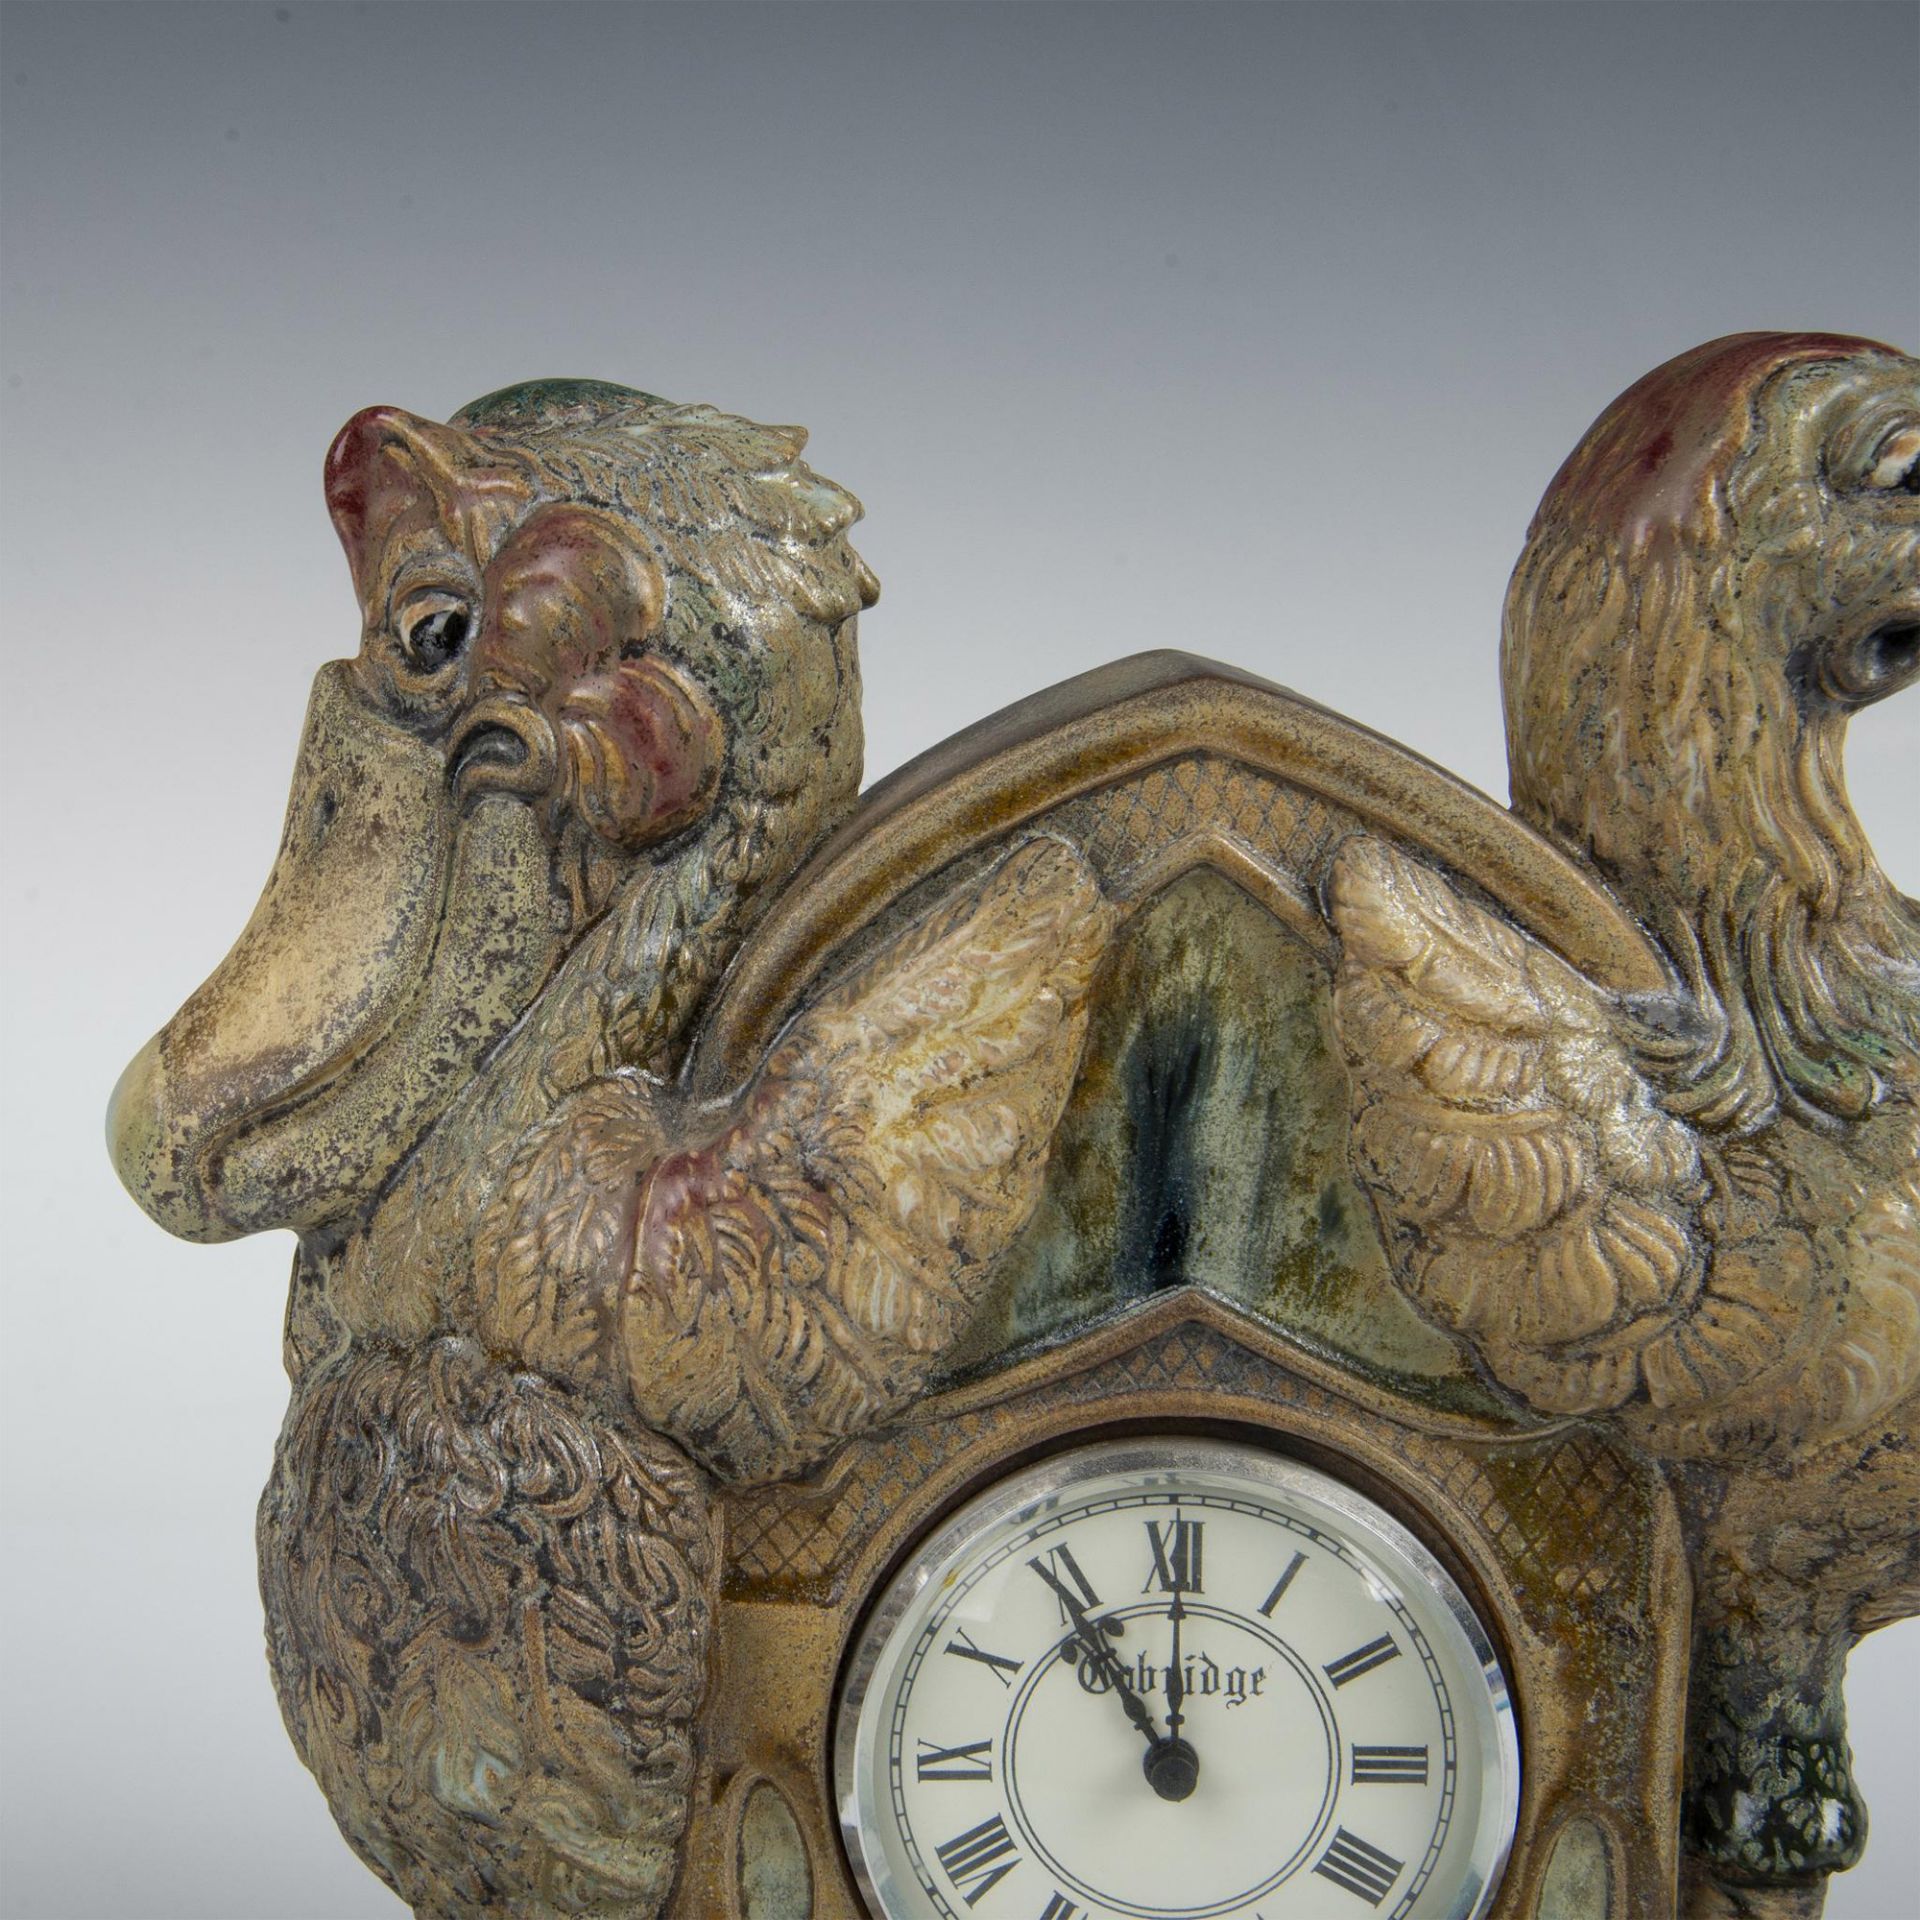 Andrew Hull for Cobridge Stoneware Clock, Caught in Time - Image 2 of 7